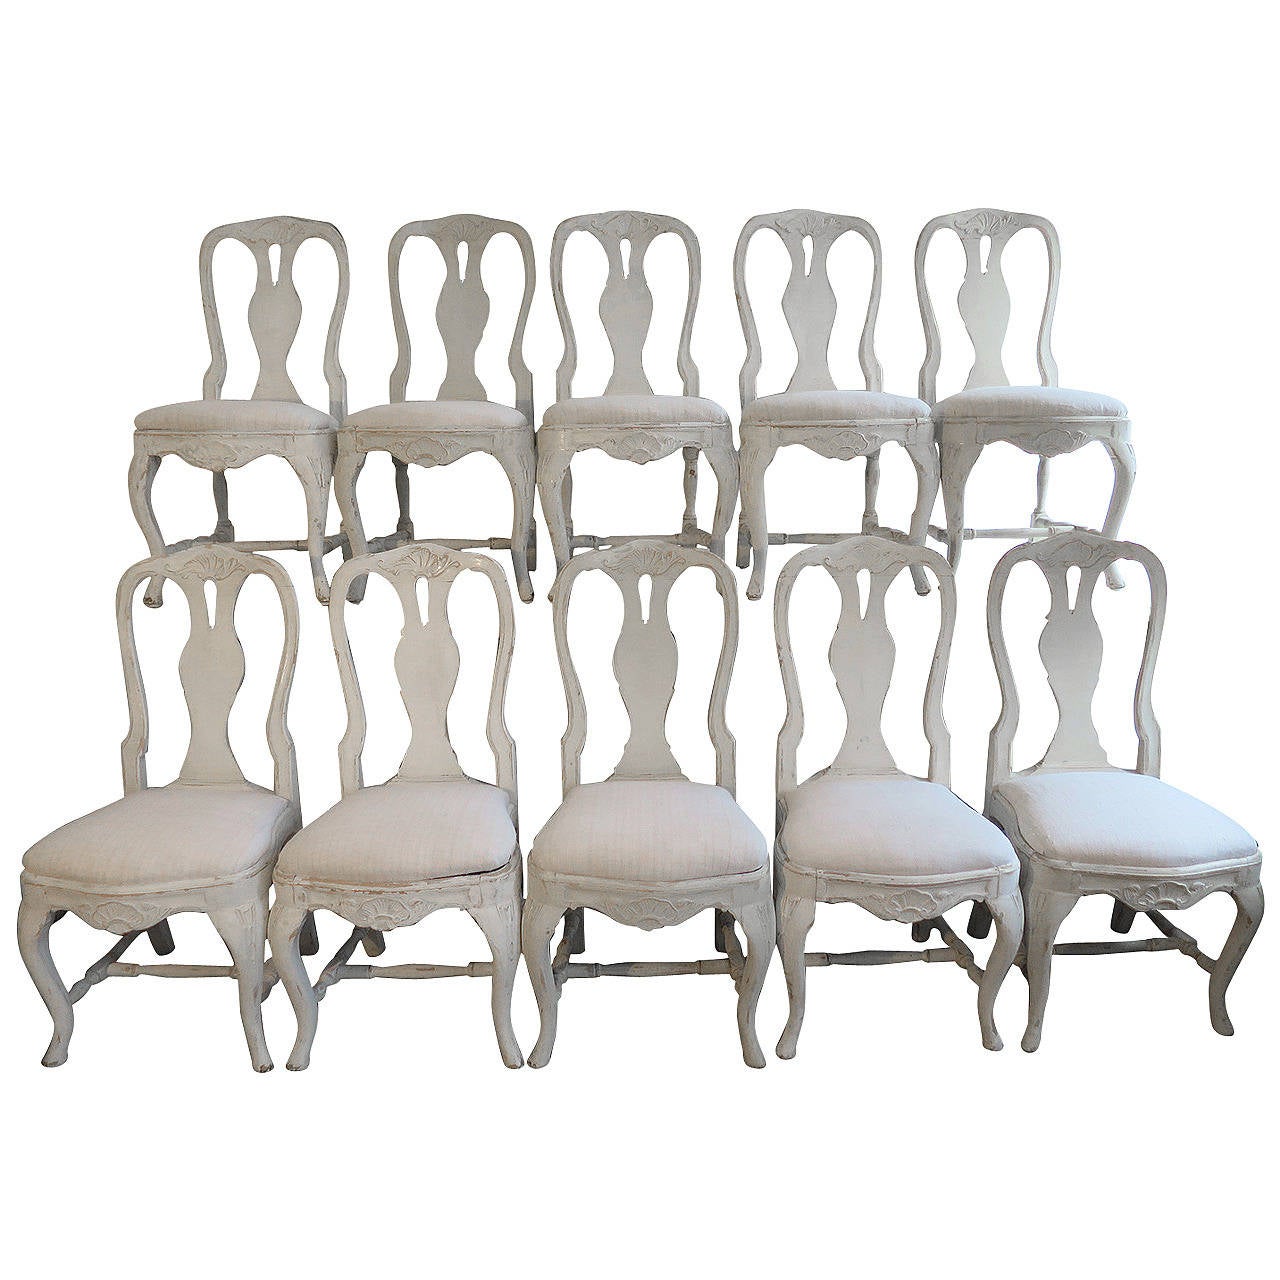 Set of Ten 19th Century Swedish Rococo Chairs For Sale